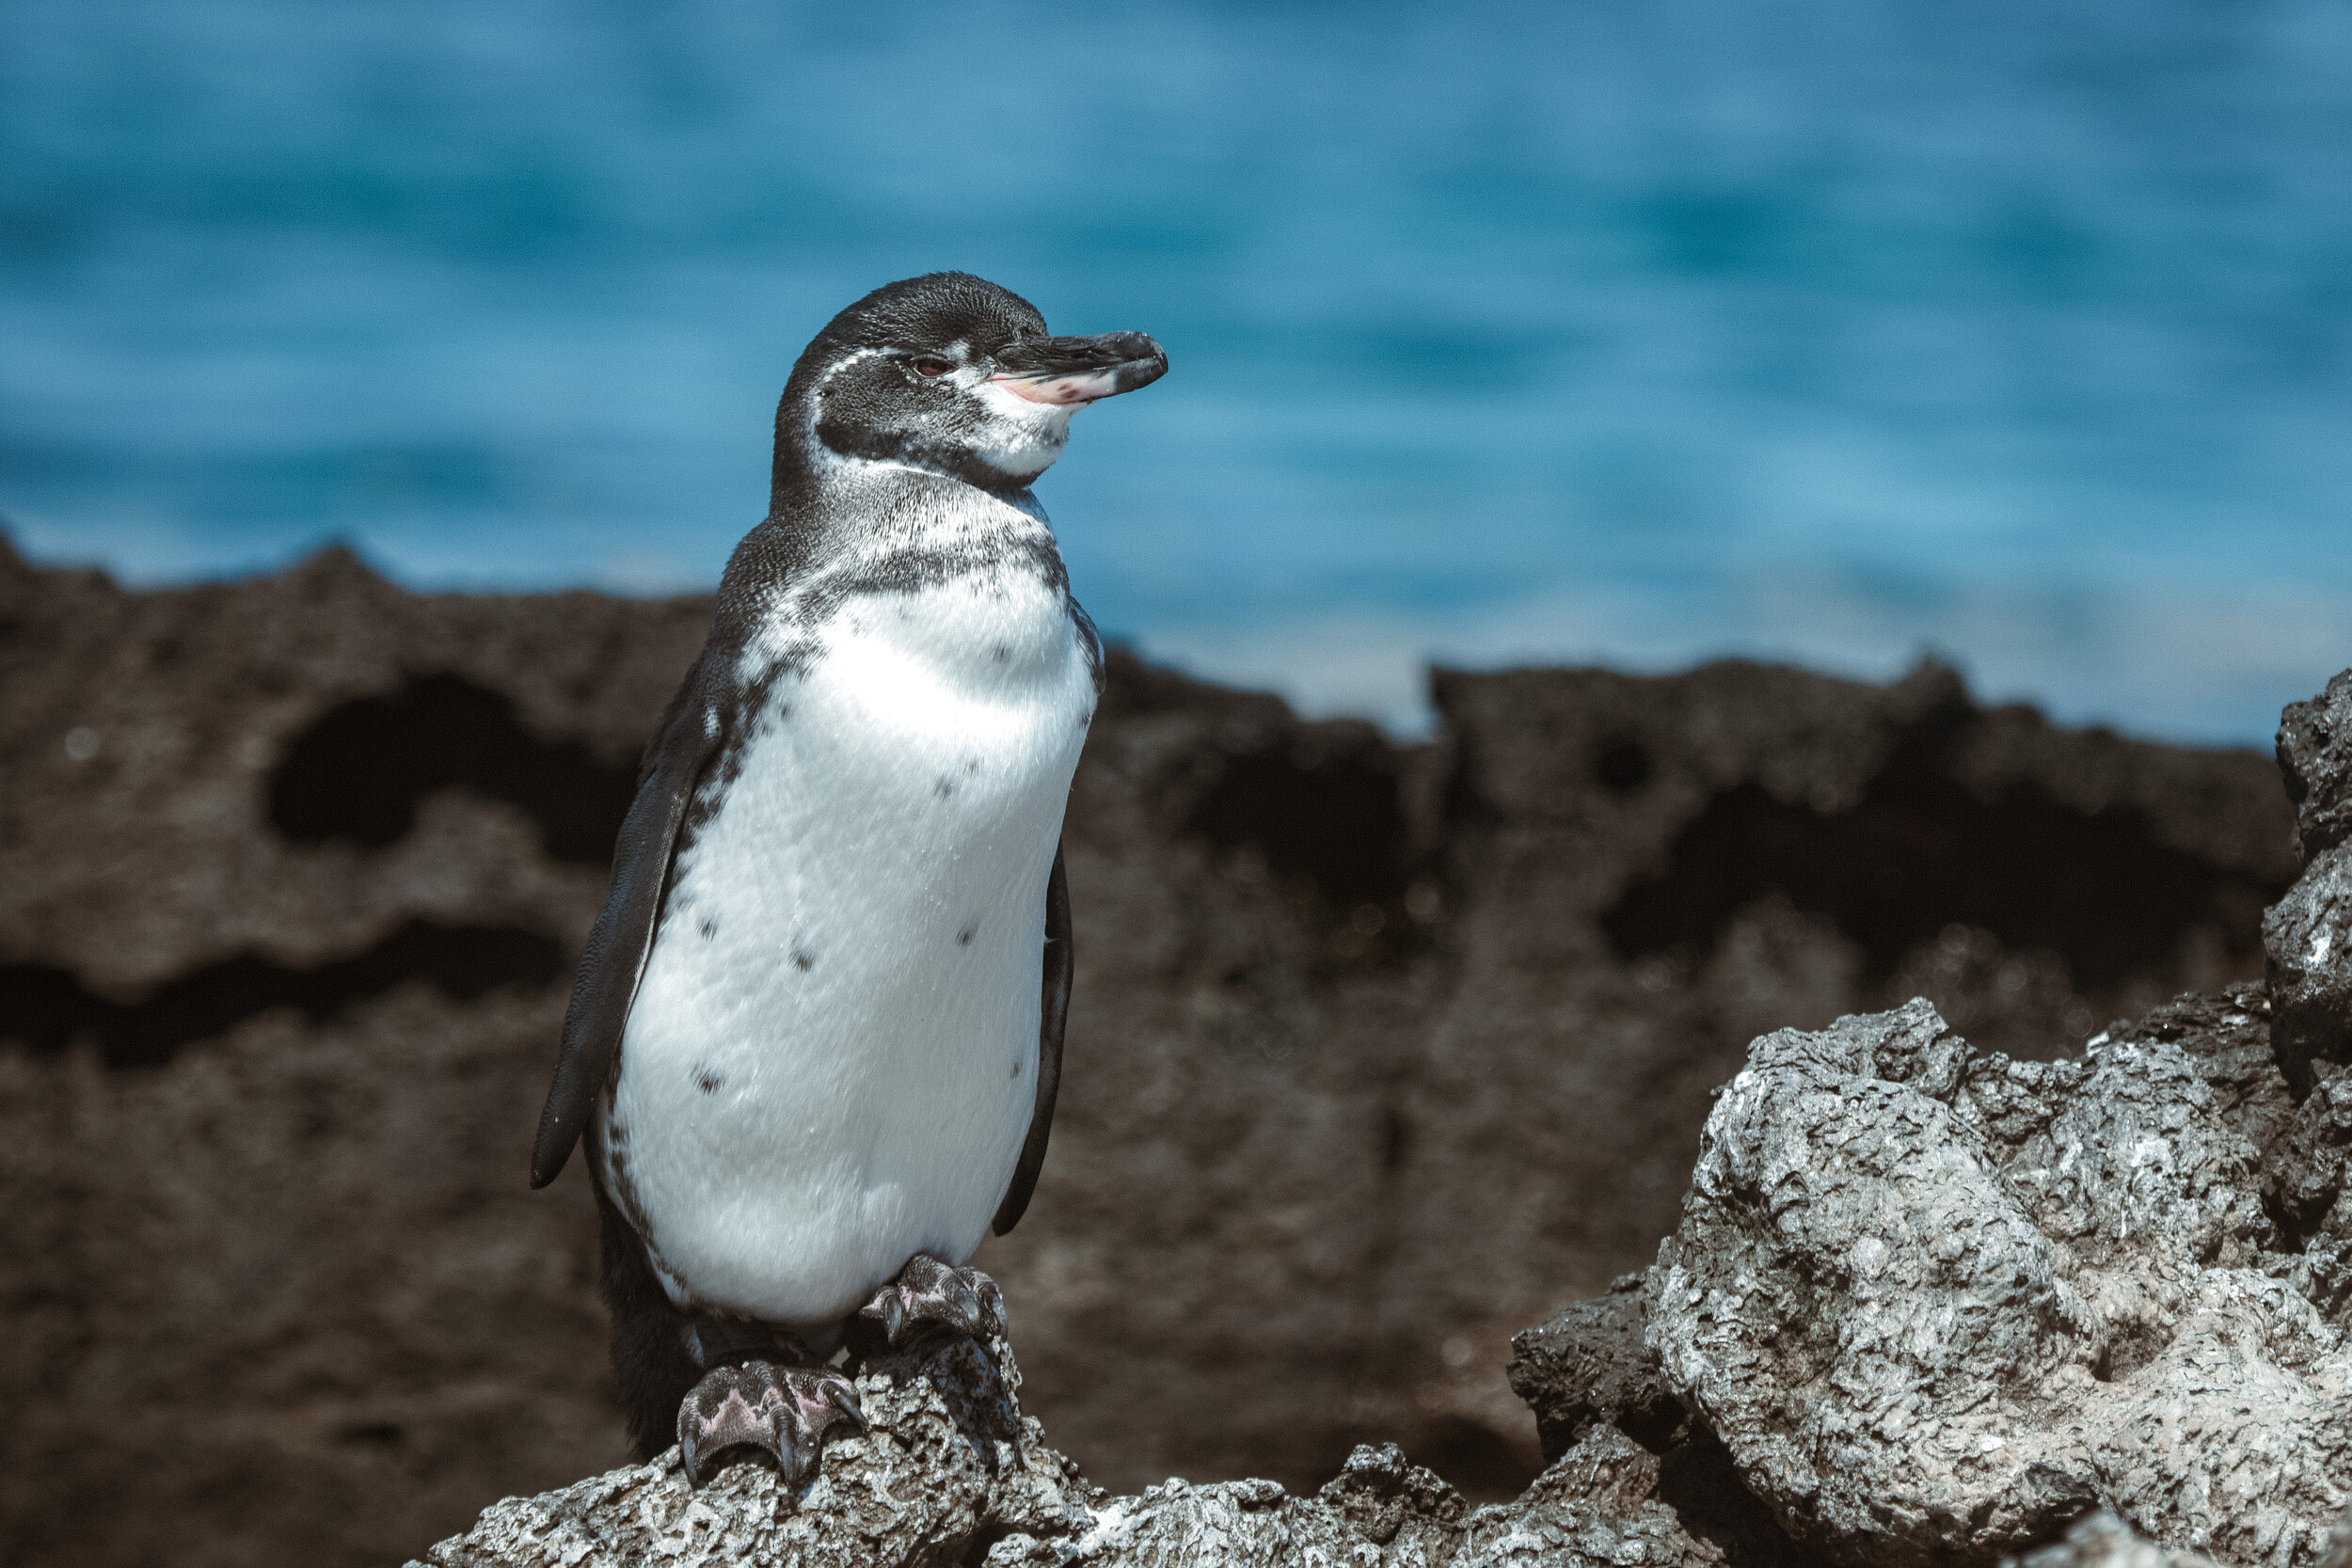 A Backpacker's guide to the Galapagos — Flossy's Wonderland